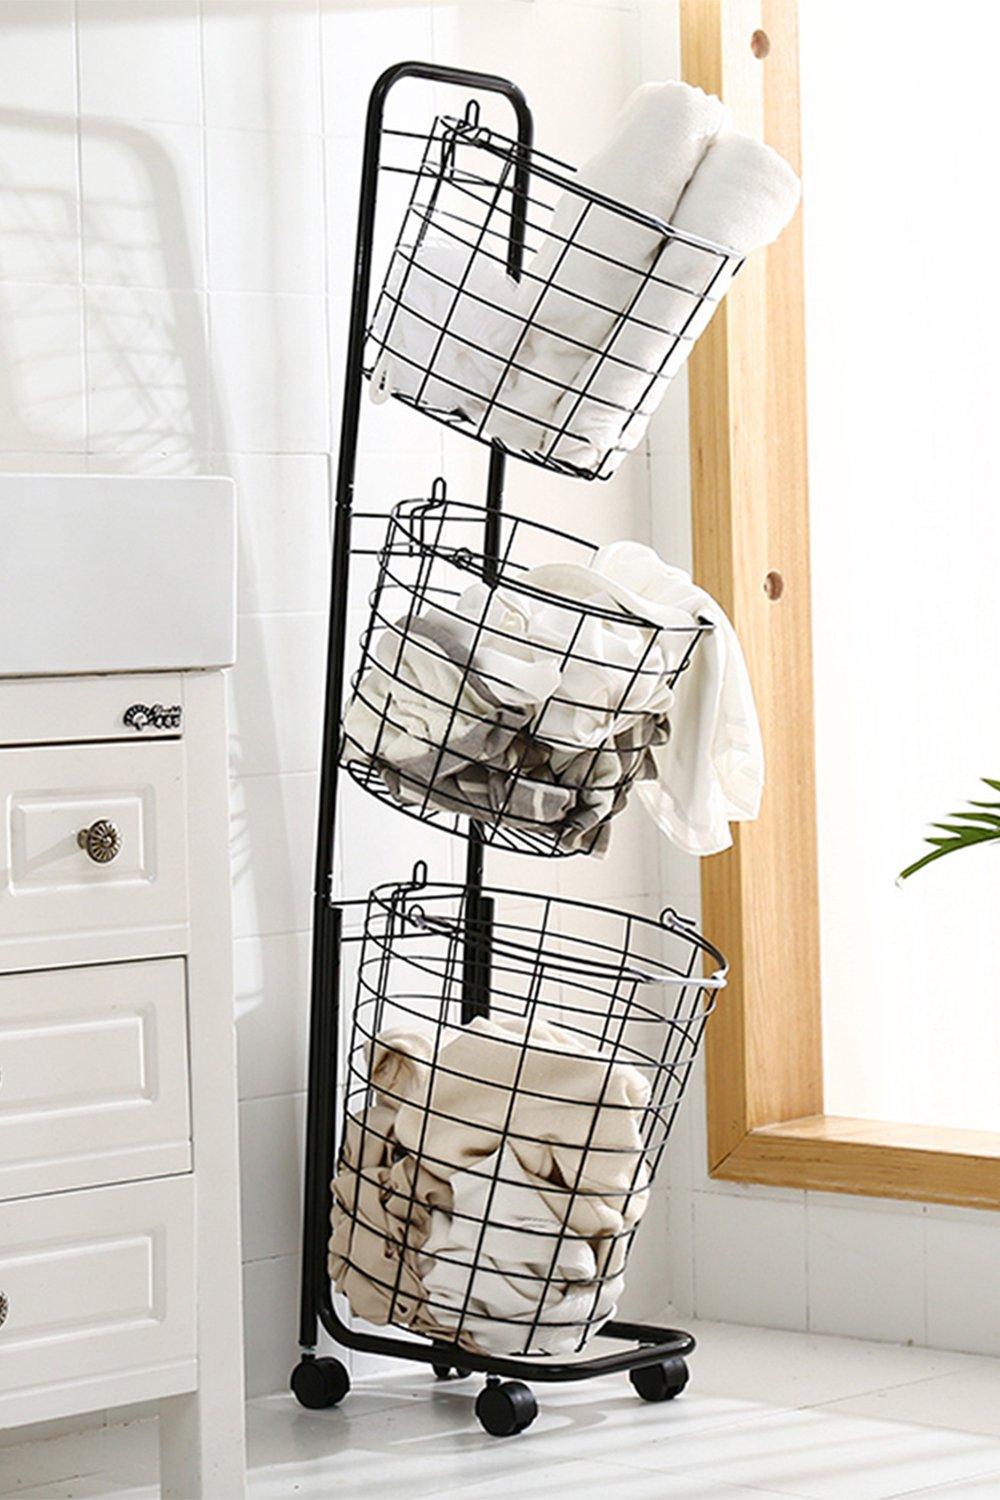 3 Tiers Metal Laundry Basket Wire Storage Dirty Clothes Detachable Basket with 4 Wheels